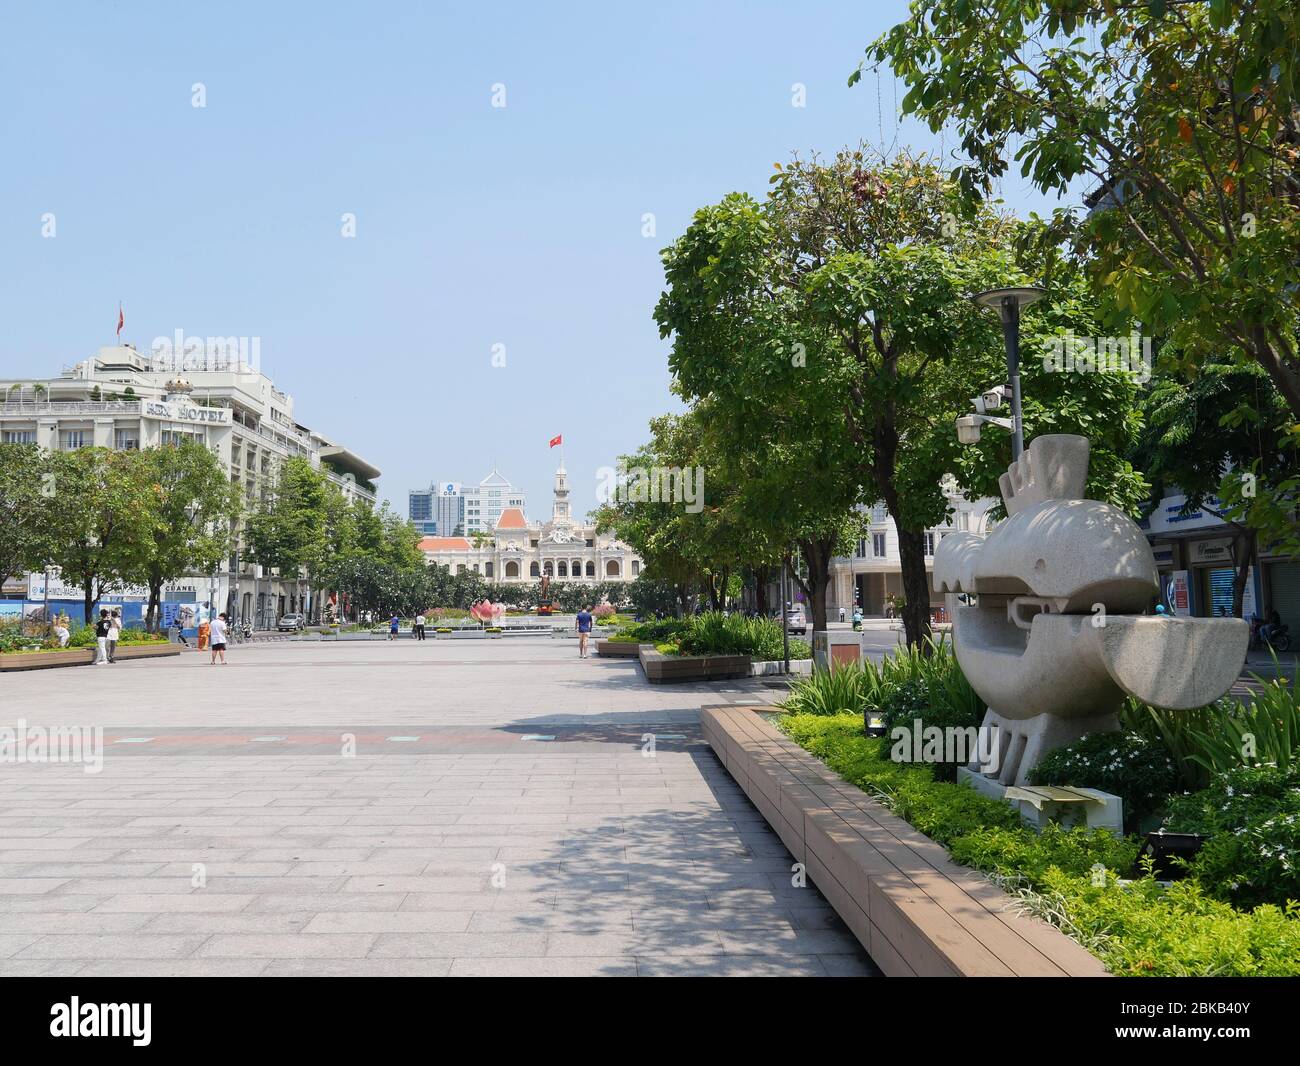 Ho Chi Minh City, Vietnam - April 30, 2020: Nguyen Hue walking street with view of the People's Committee of Ho Chi Minh City building Stock Photo